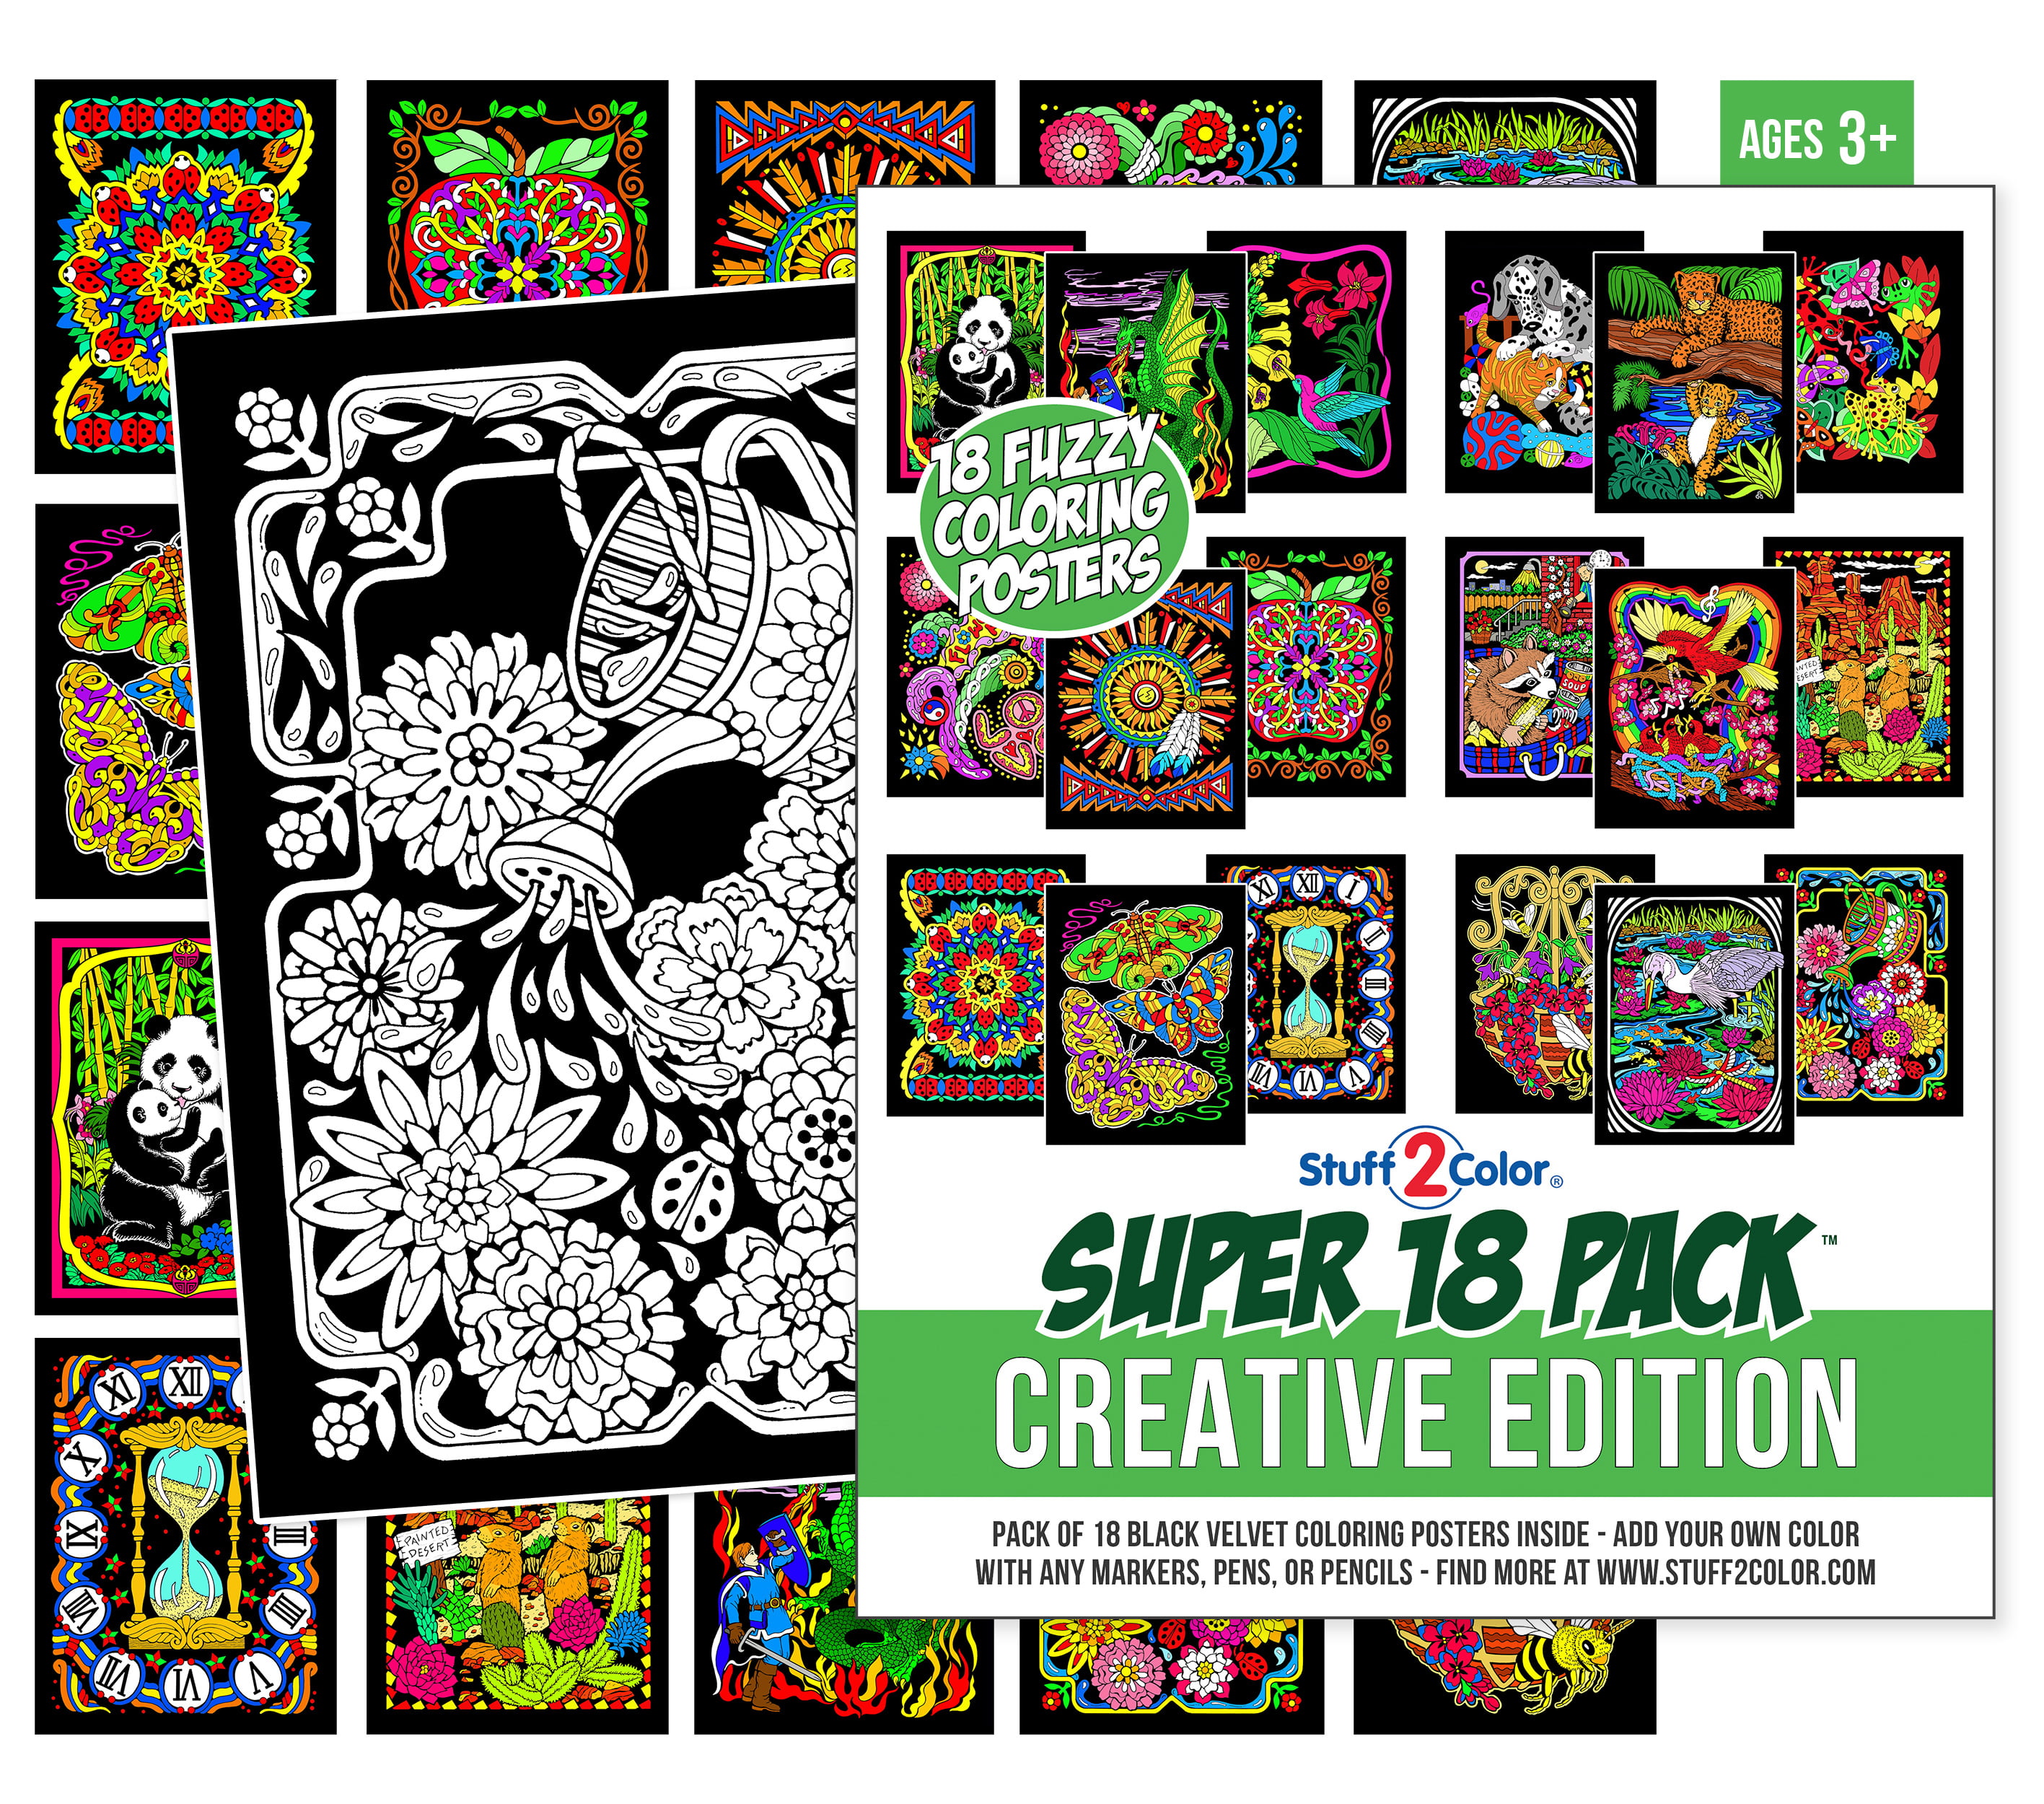 45 Velvet coloring posters ideas  coloring posters, fuzzy posters, poster  colour